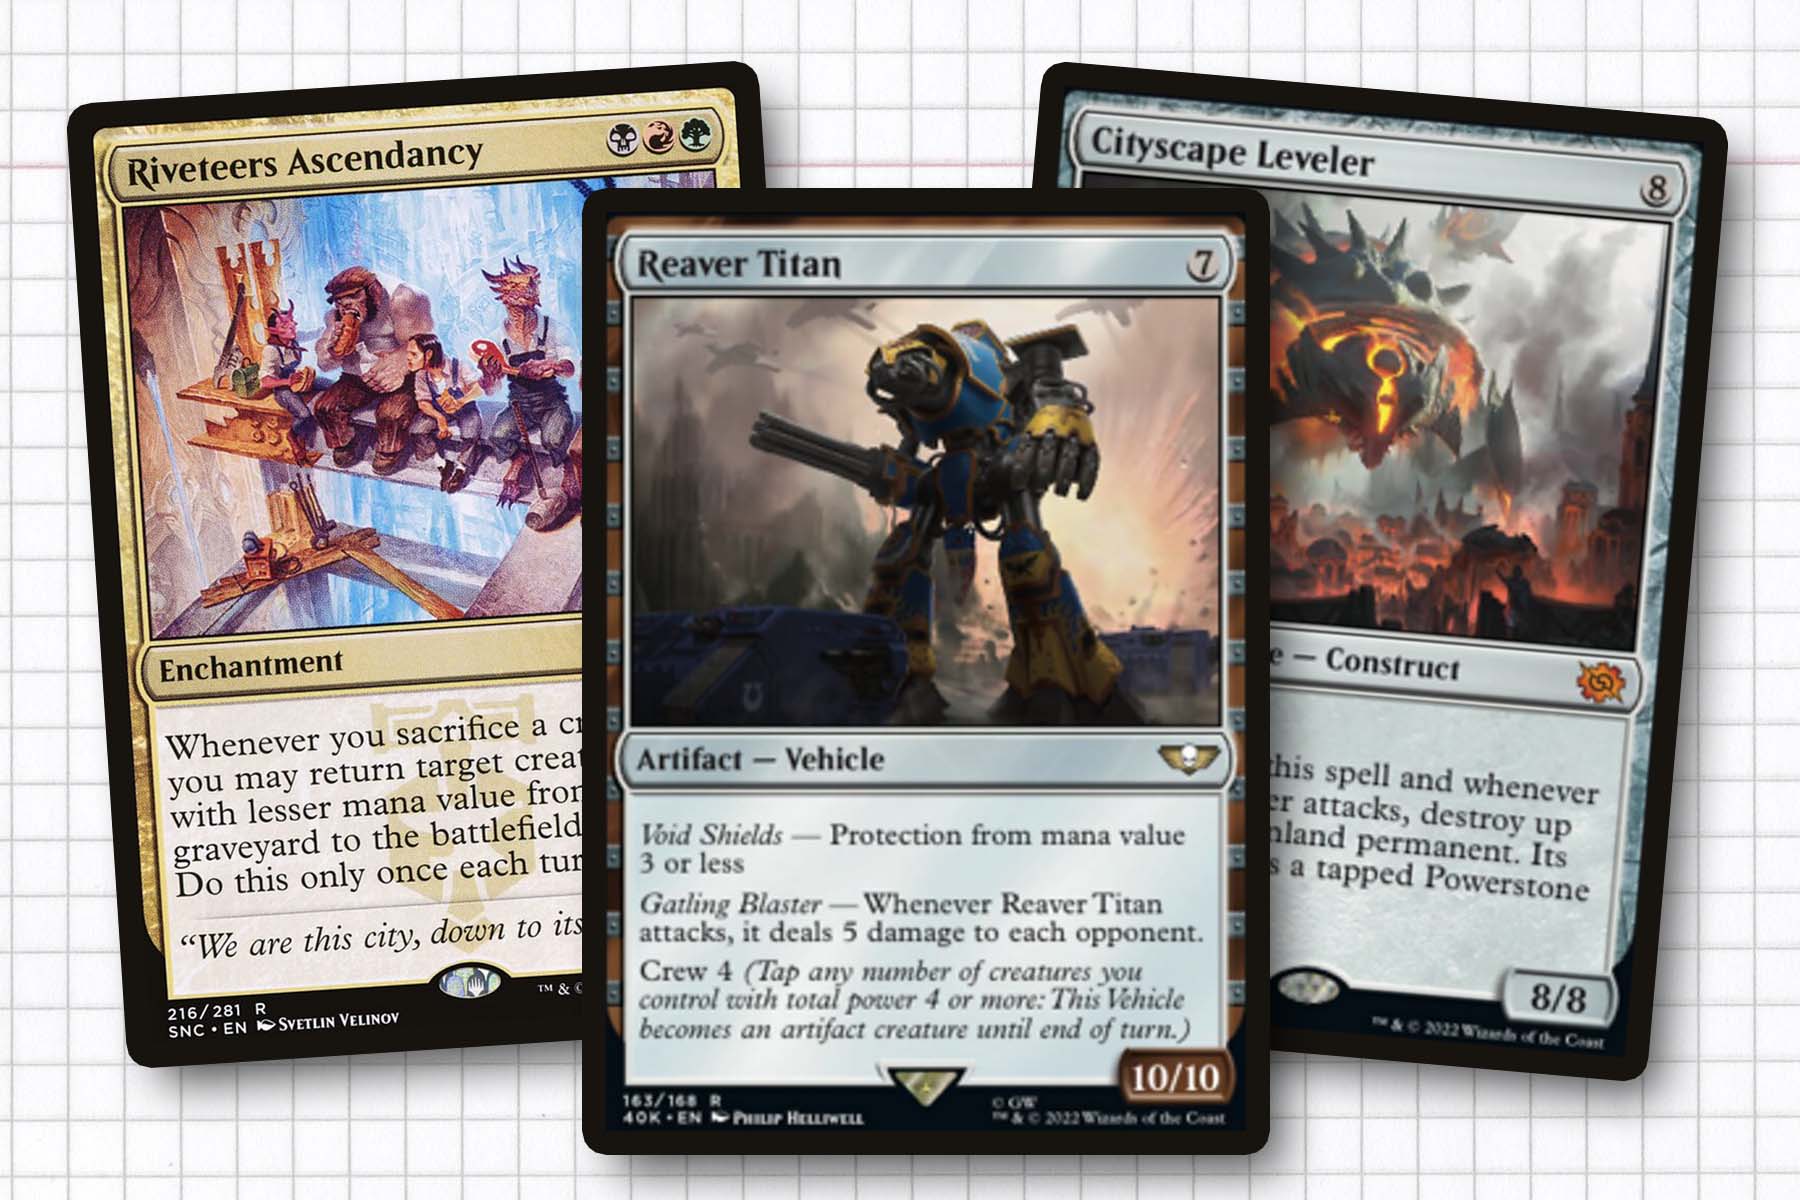 Notable 2022 cards that have been considered for this deck at some point. Riveteers Ascendancy, Reaver Titan, and Cityscape Leveler.